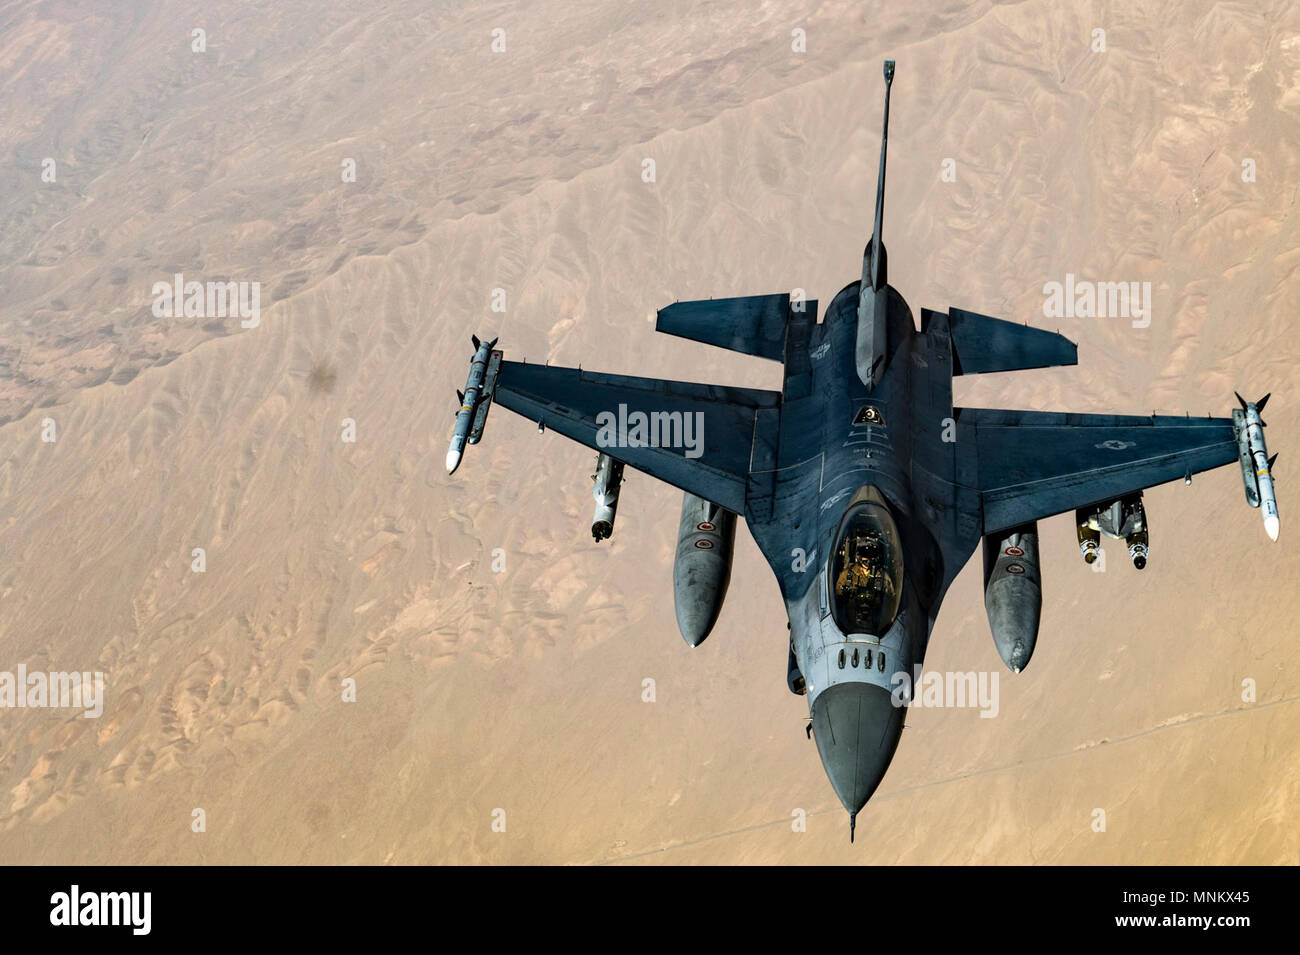 A U.S. Air Force F-16C Fighting Falcon pilot flies in formation while his wingman conducts refueling operations with a KC-135 Stratotanker, assigned to the 340th Expeditionary Air Refueling Squadron Detatchment 1, over Afghanistan in support of Operation Freedom's Sentinel, March 11, 2018. The F-16's capabilities include air superiority, fighter escort, reconnaissance, aerial refueling, close air support, air defense suppression and precision strikes. Stock Photo